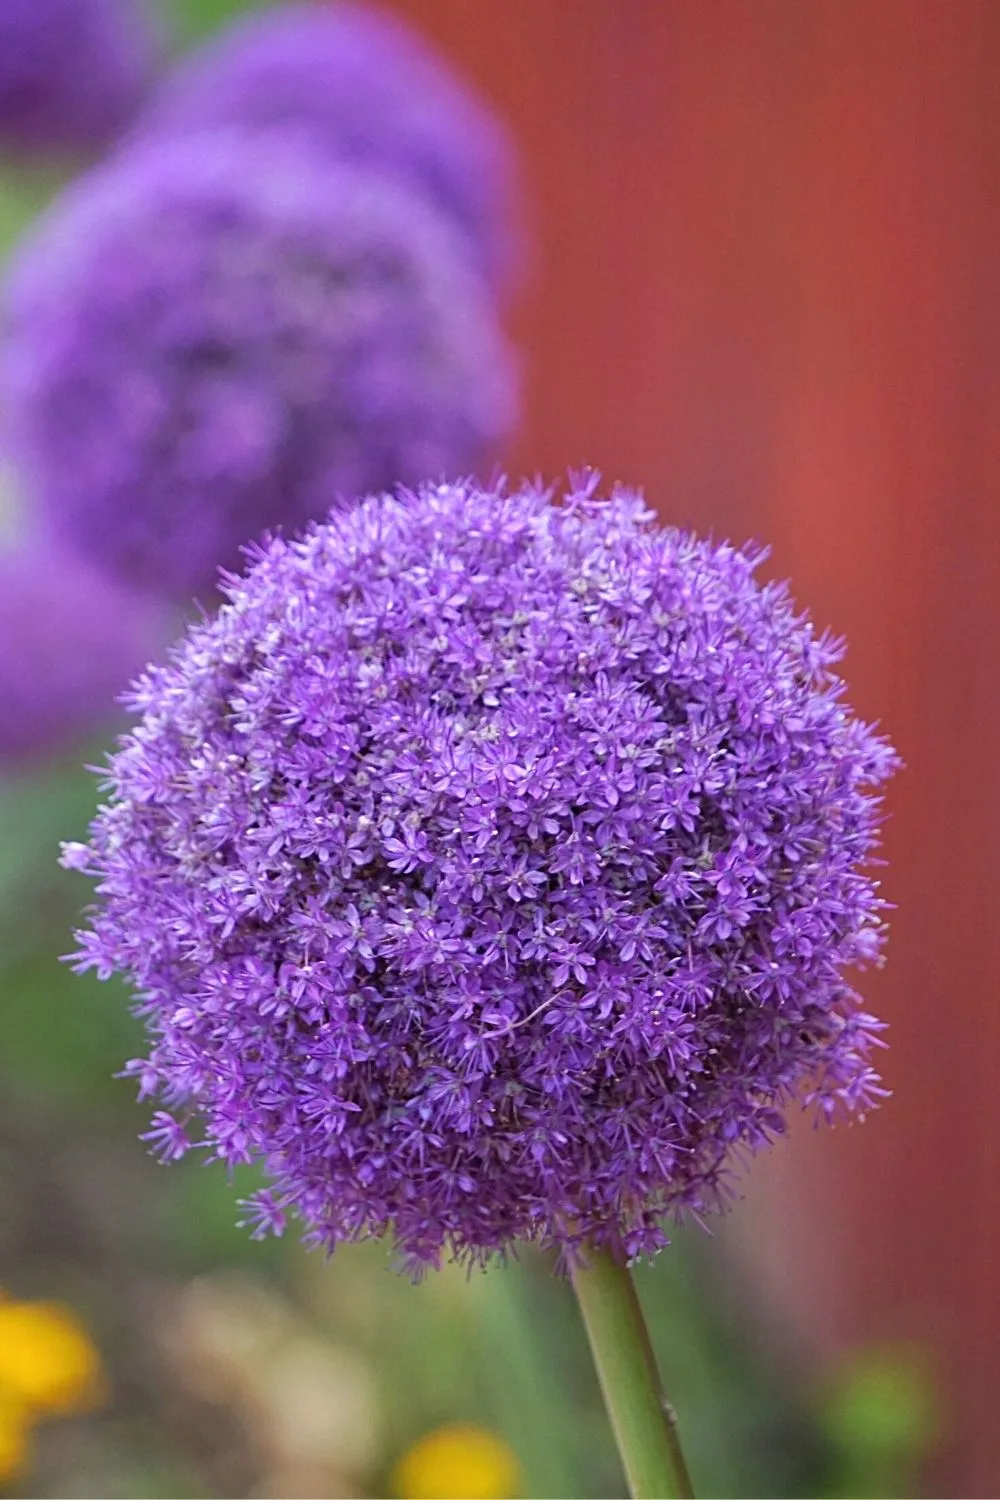 Allium has interesting pompom-shaped flowers that looks great on your southeast facing garden